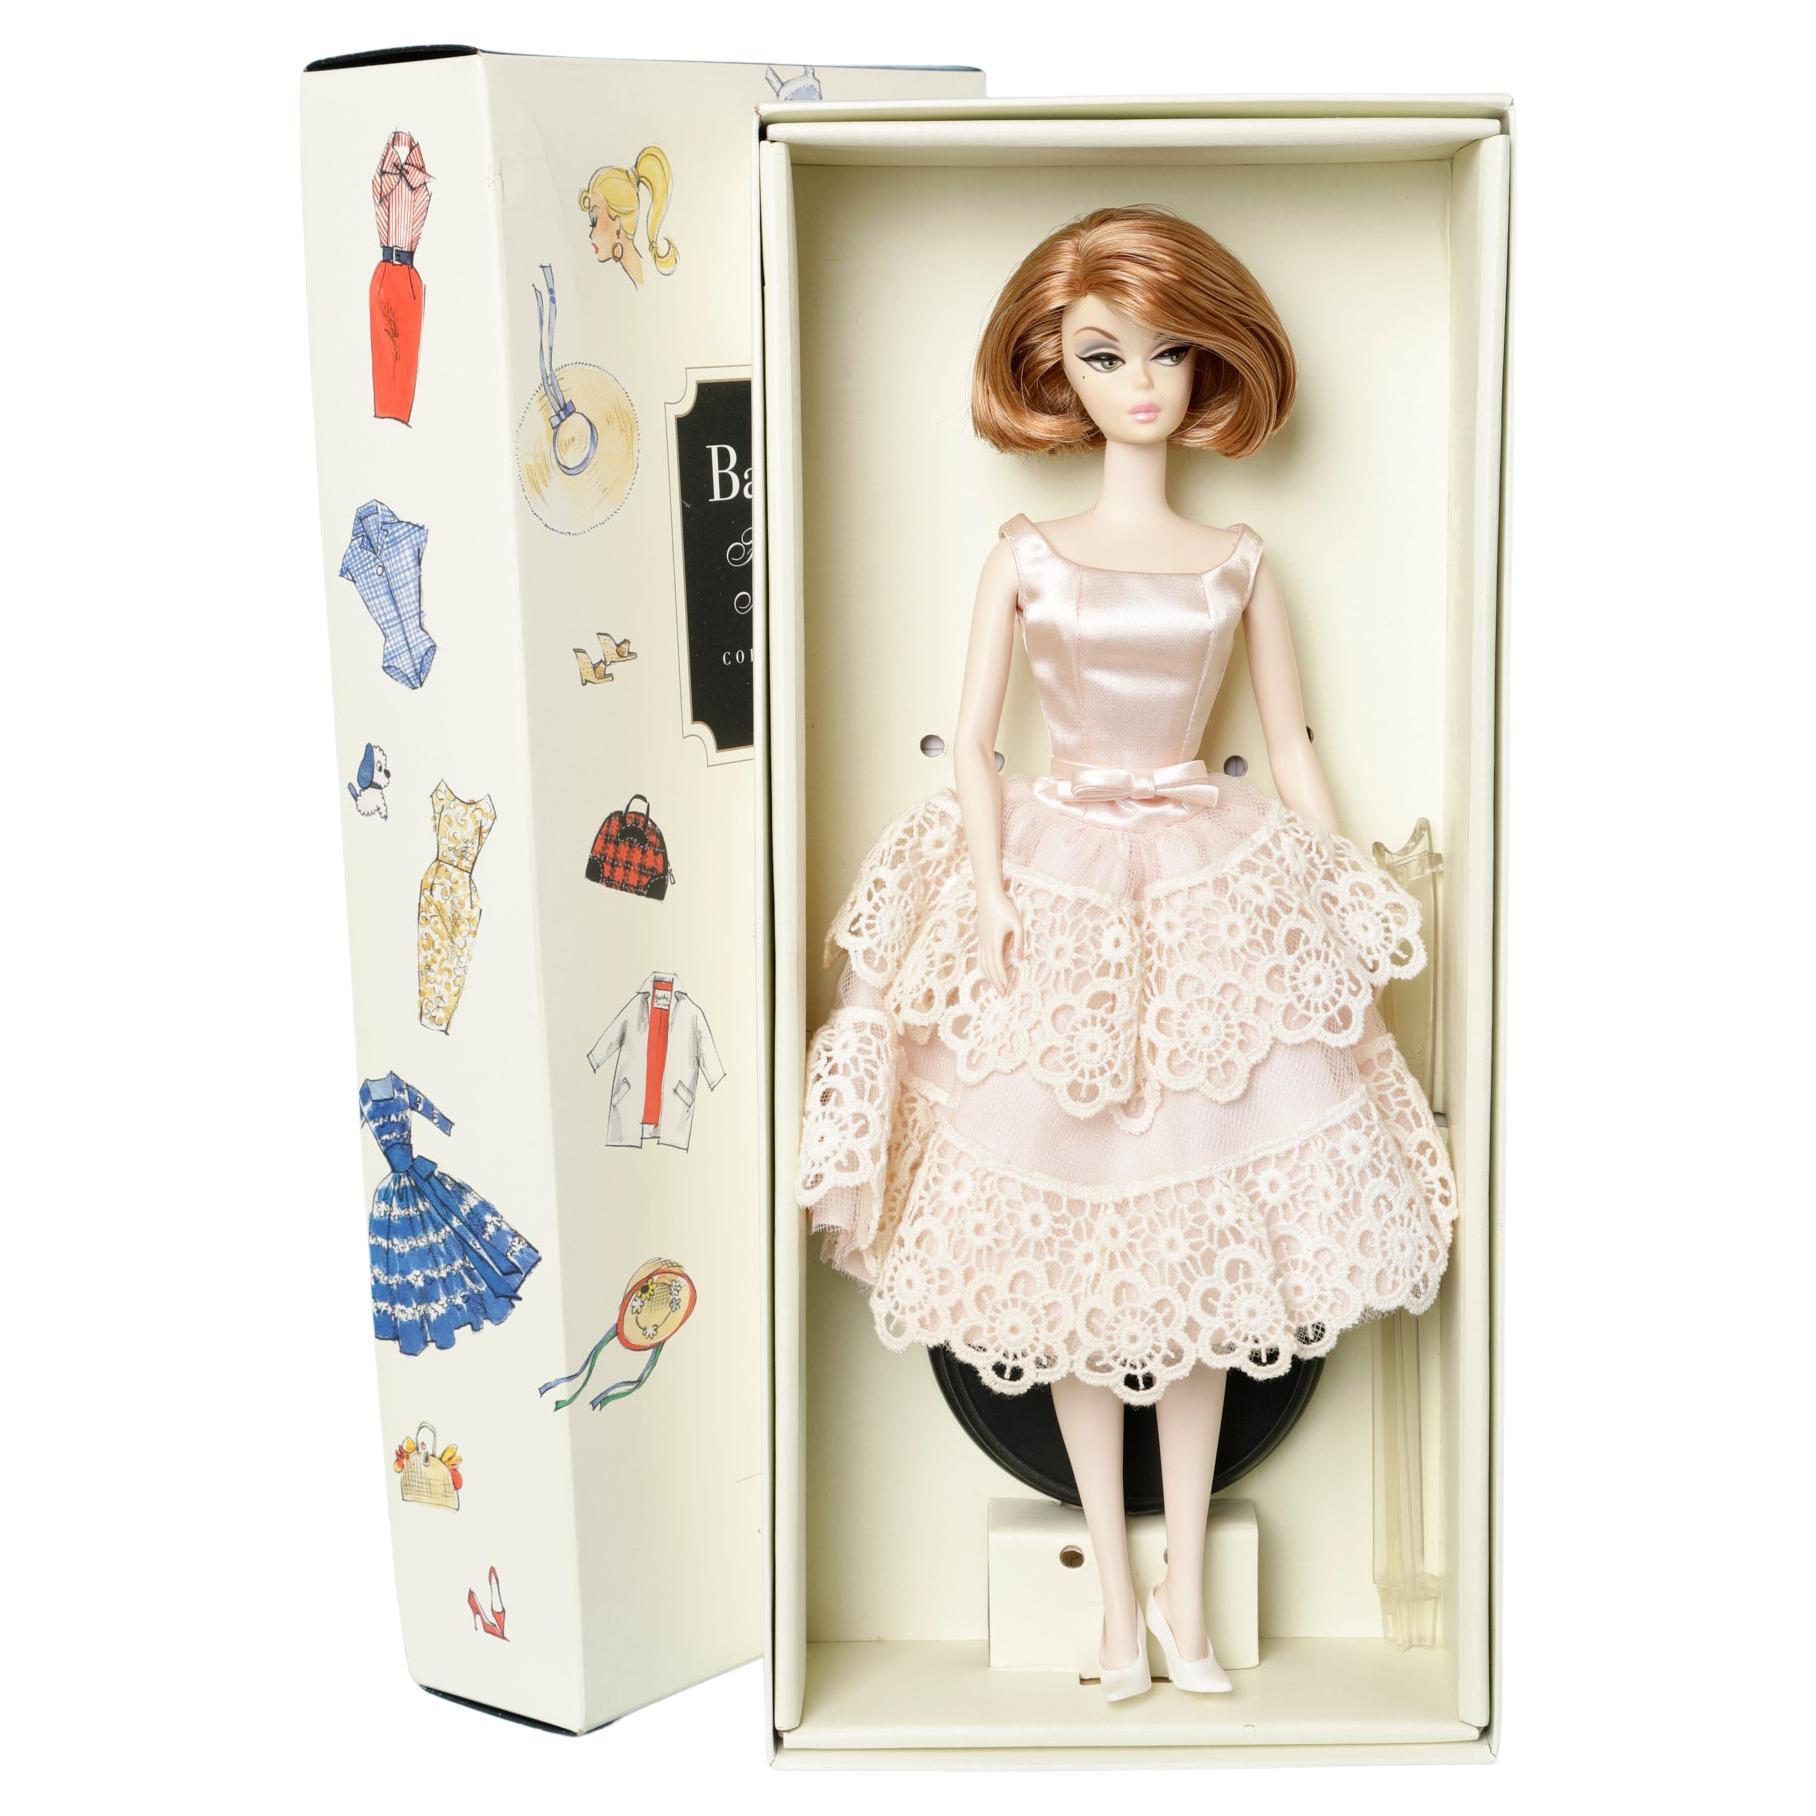 Barbie Fashion Model "Southern Bell" . 50th Anniversary